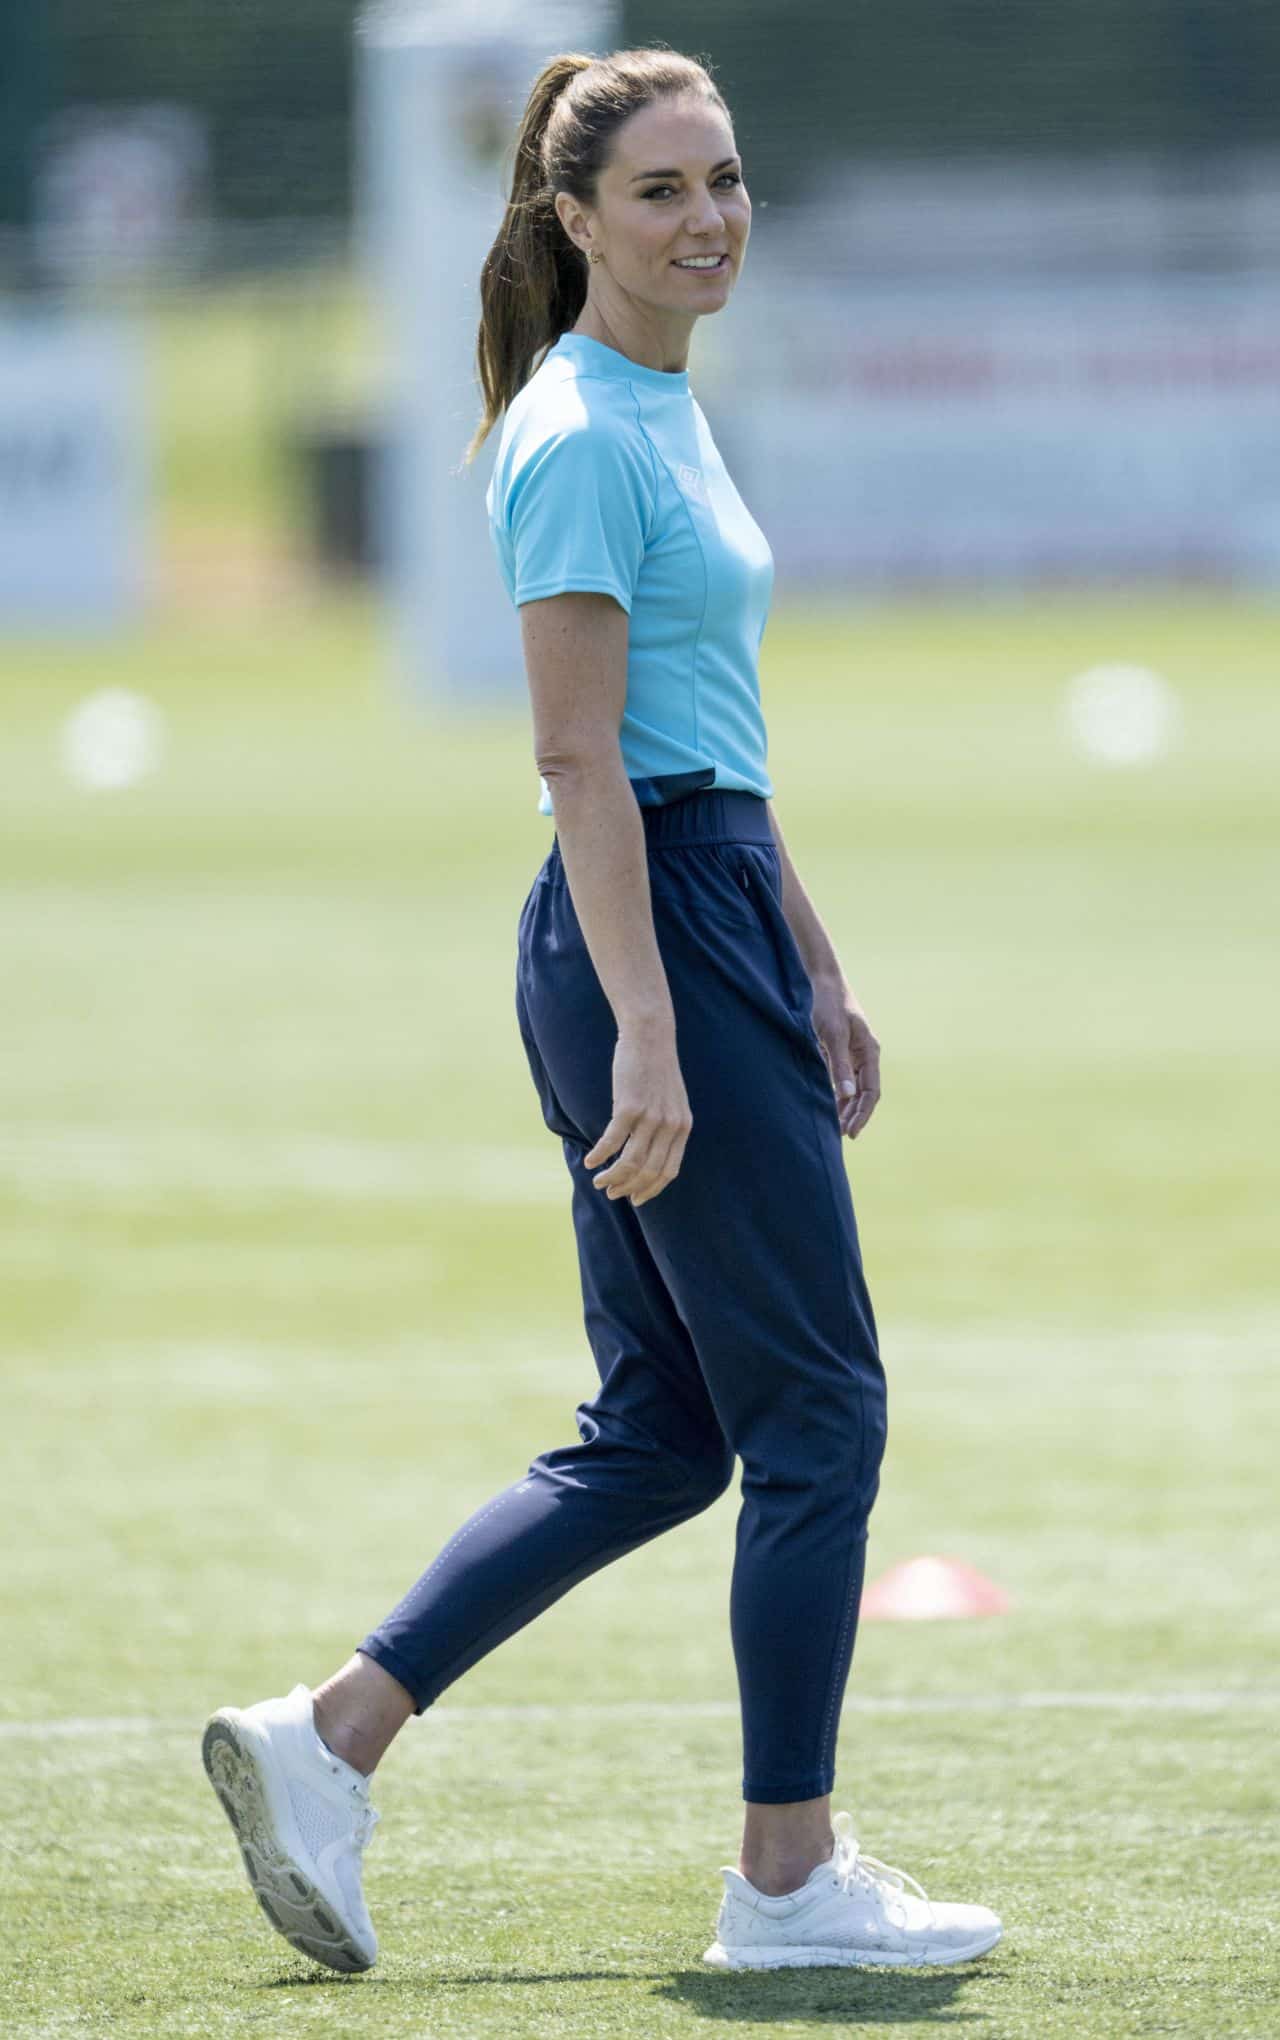 Kate Middleton Enjoys Playing Rugby in Sweatpants and White Sneakers